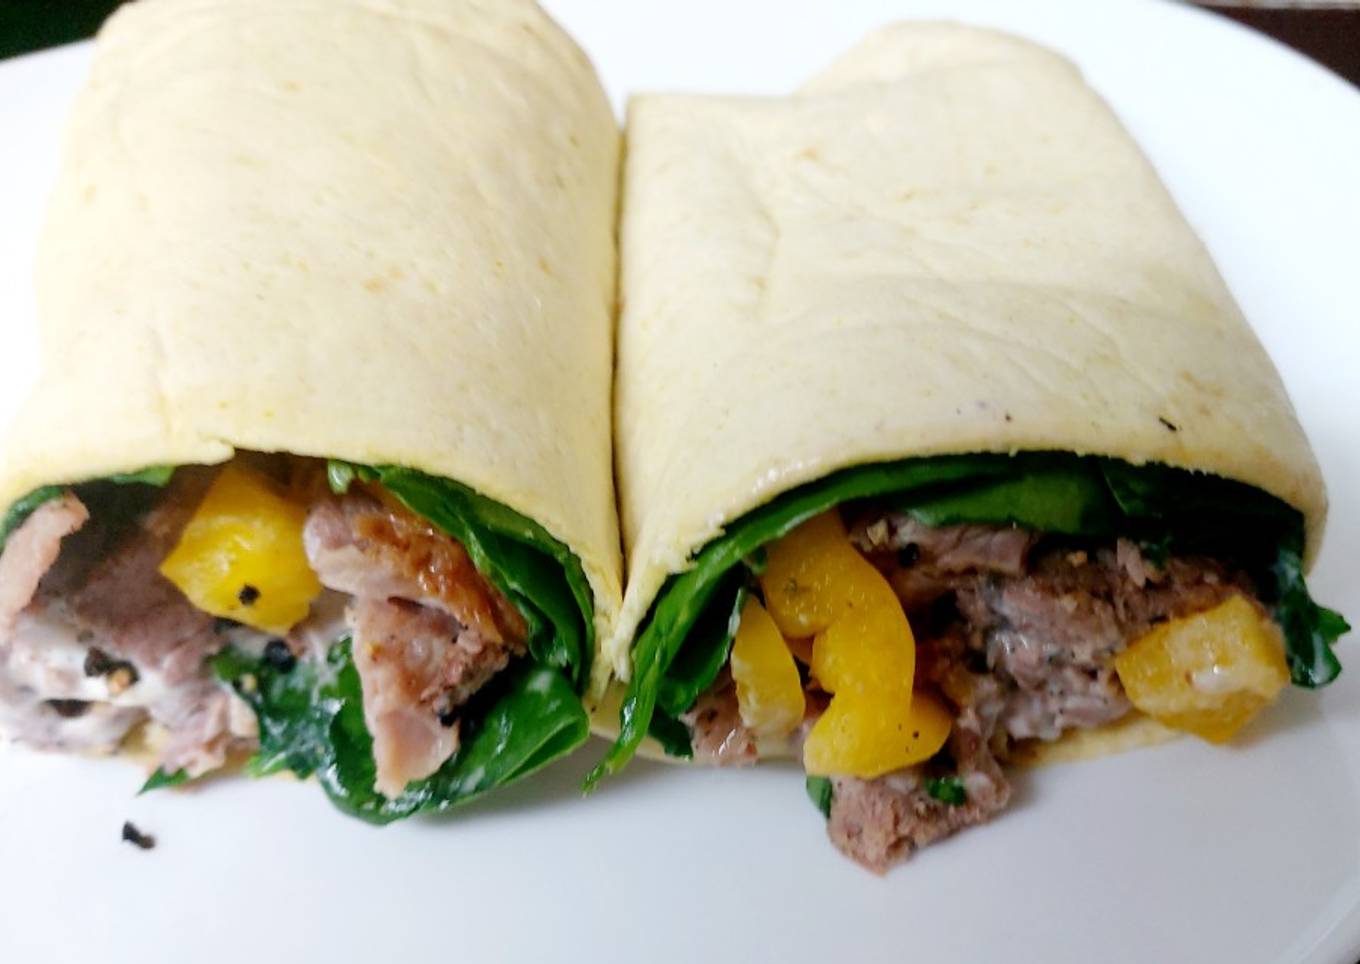 My Roast Beef & Black Pepper Wraps with Spinach 🤩